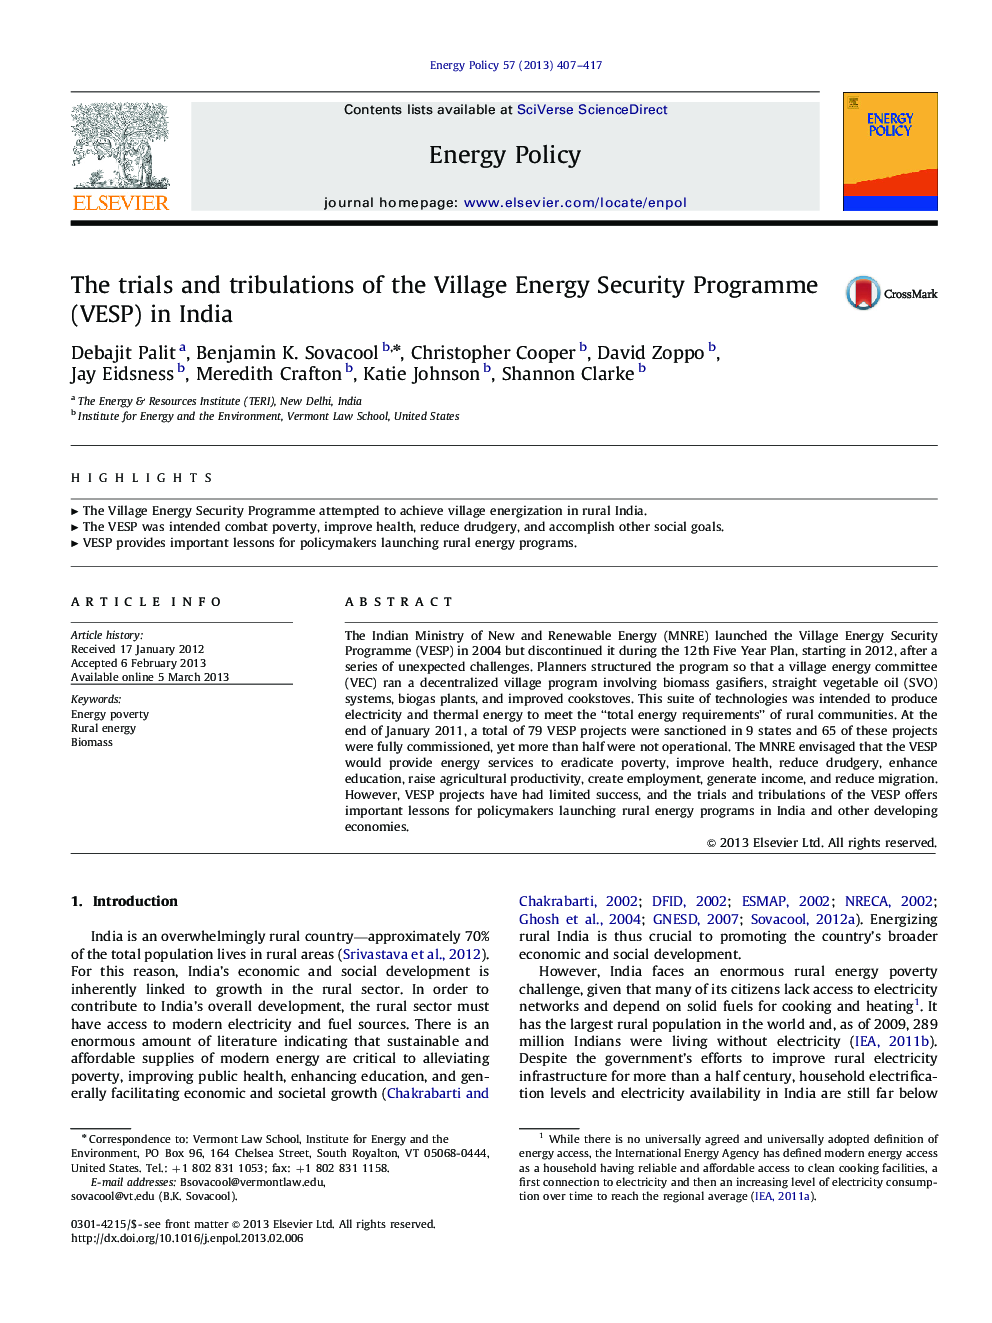 The trials and tribulations of the Village Energy Security Programme (VESP) in India